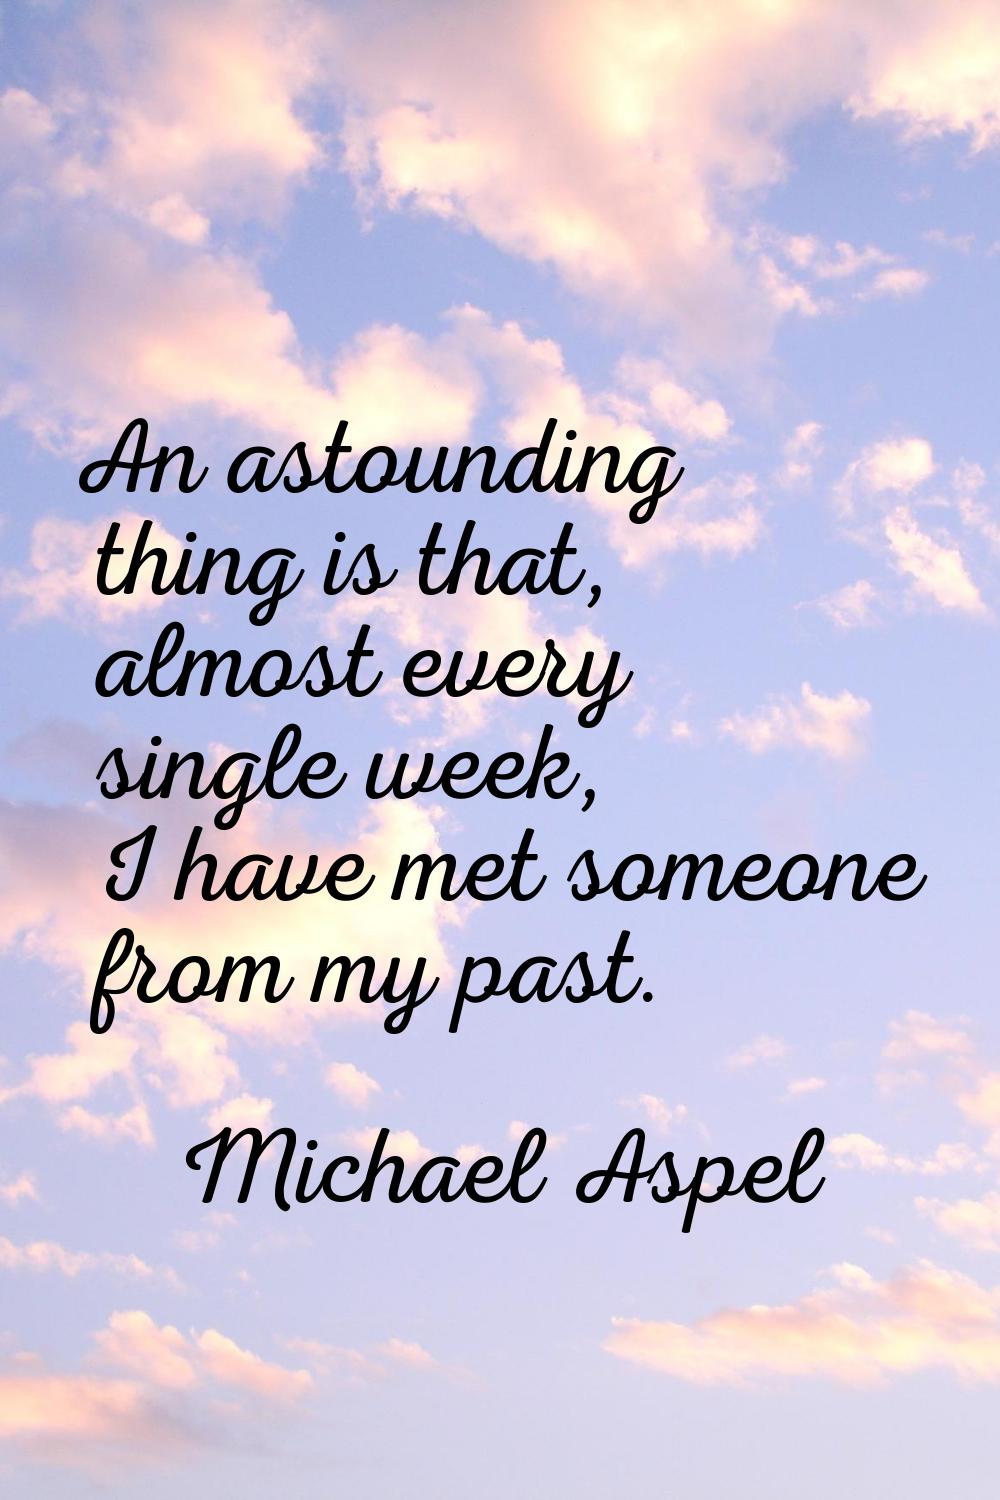 An astounding thing is that, almost every single week, I have met someone from my past.